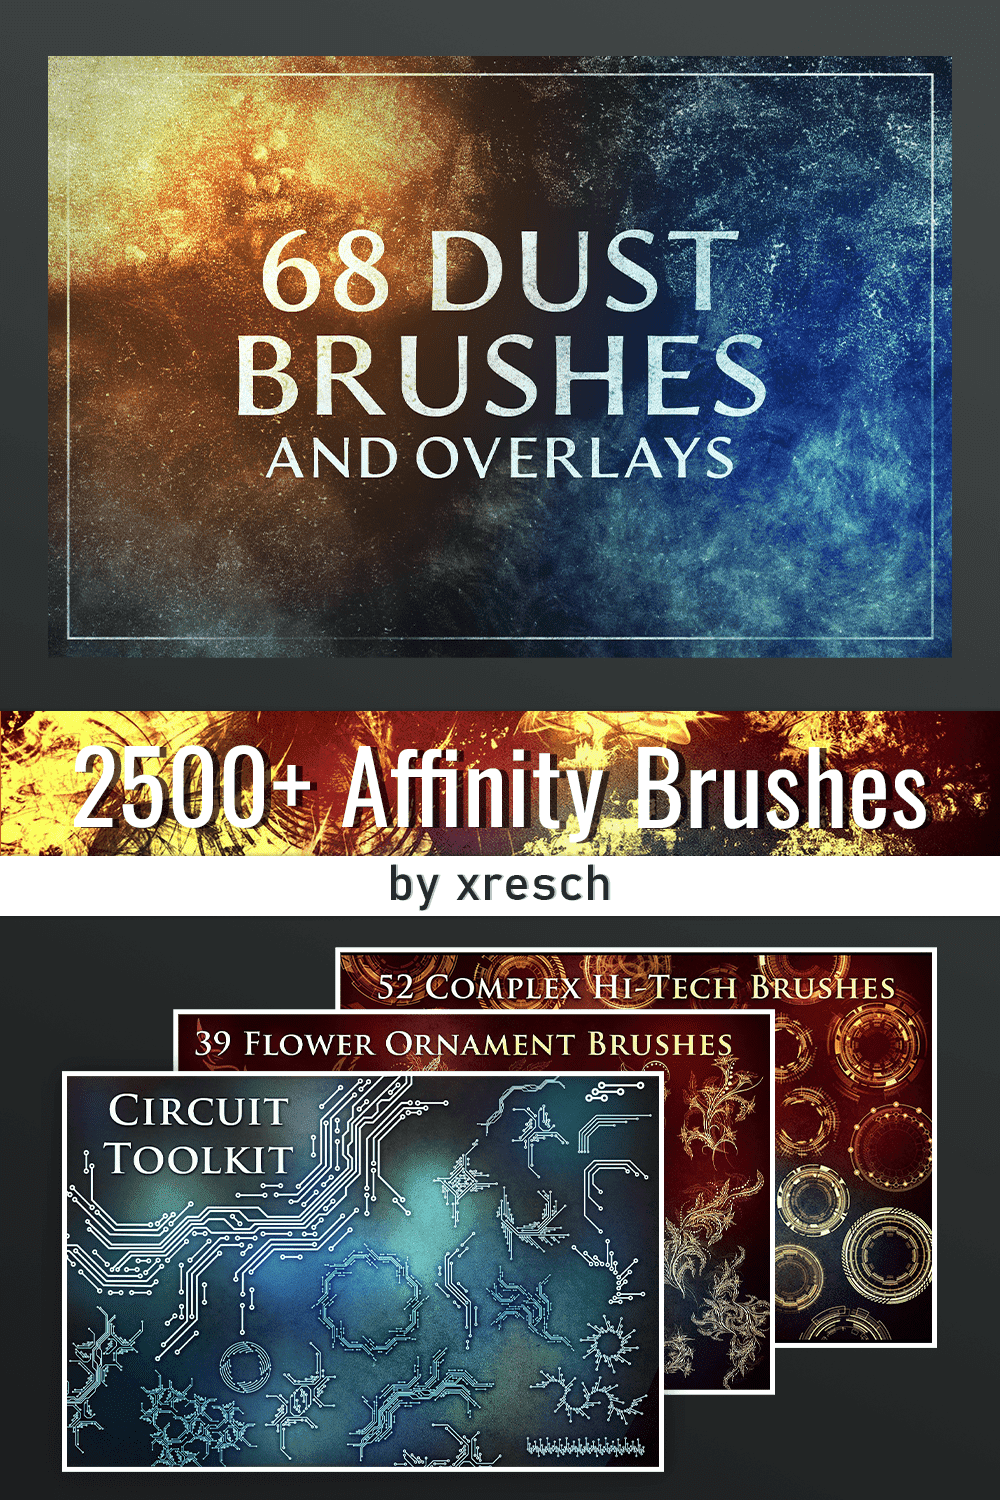 2500 affinity brushes, picture for pinterest 1000x1500.